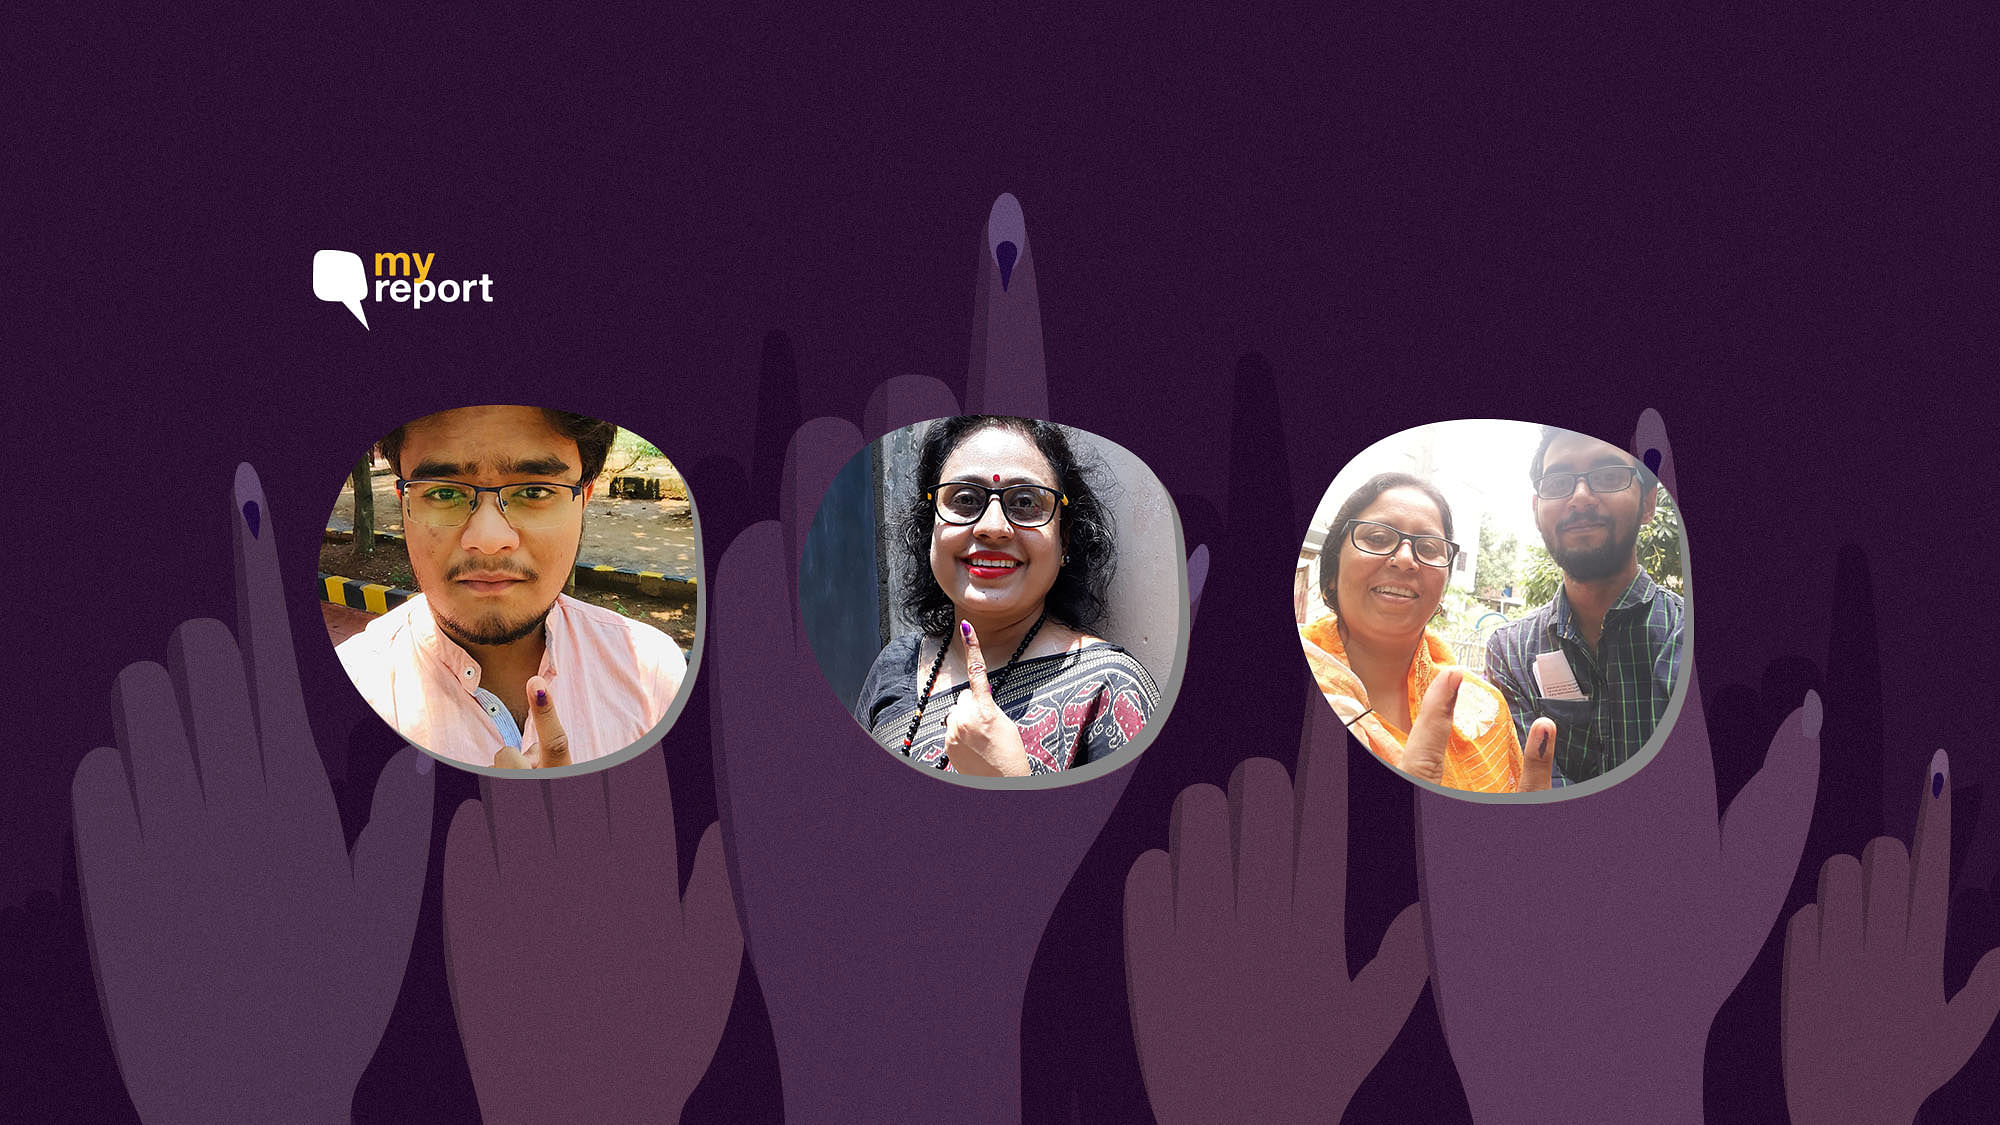 Voting is underway for the third phase of the Lok Sabha elections 2019.